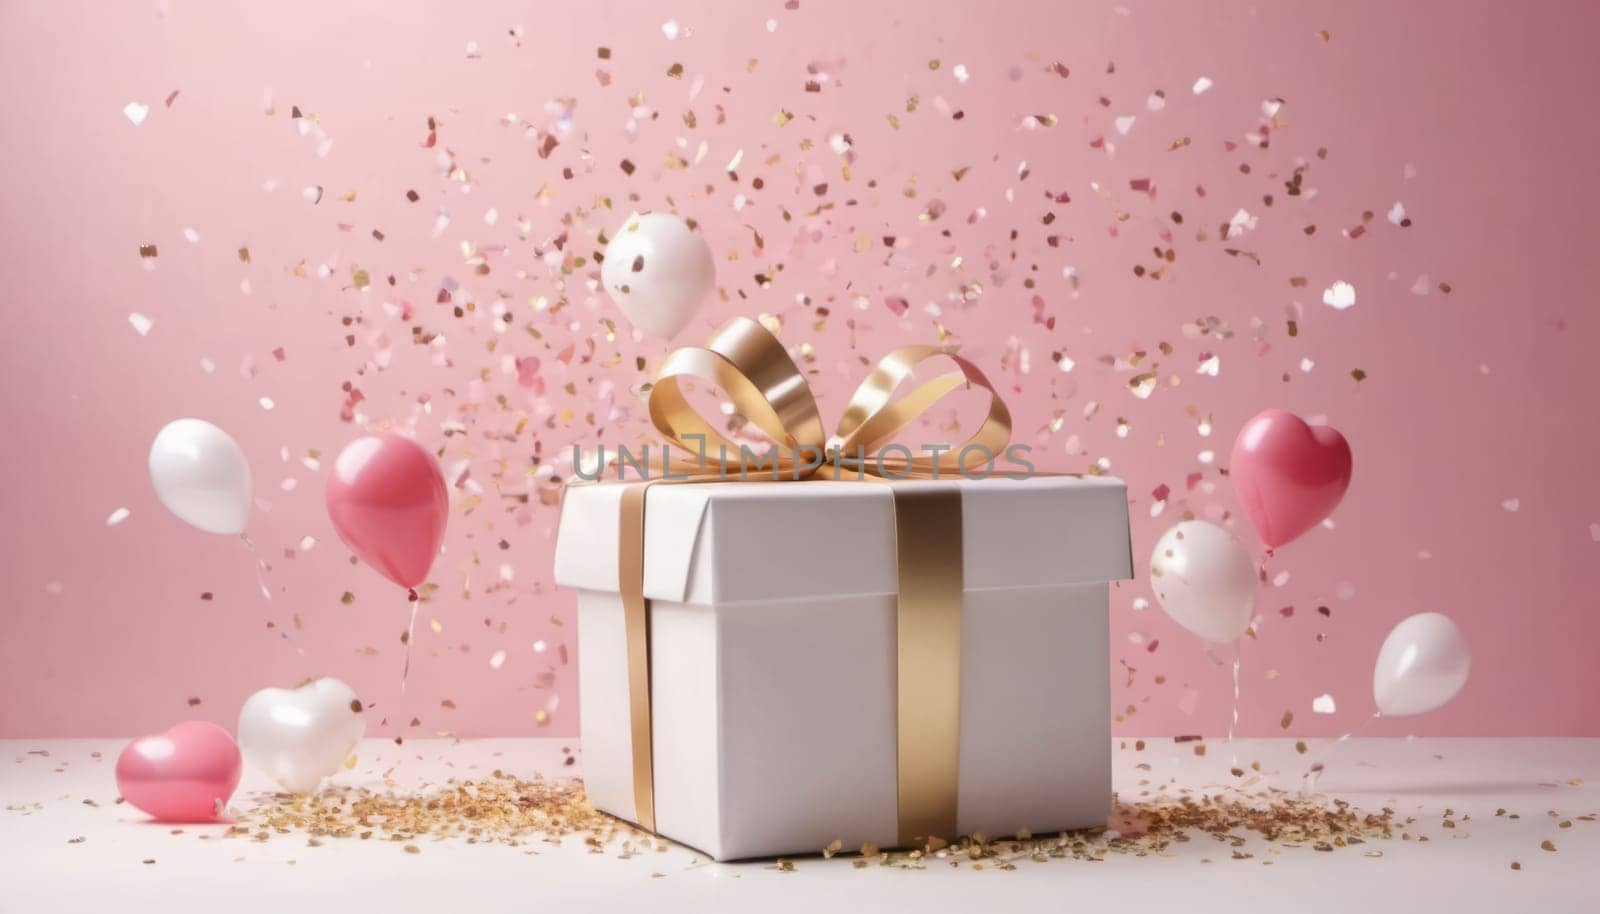 Gift Boxes and Balloons for Valentine Day by nkotlyar